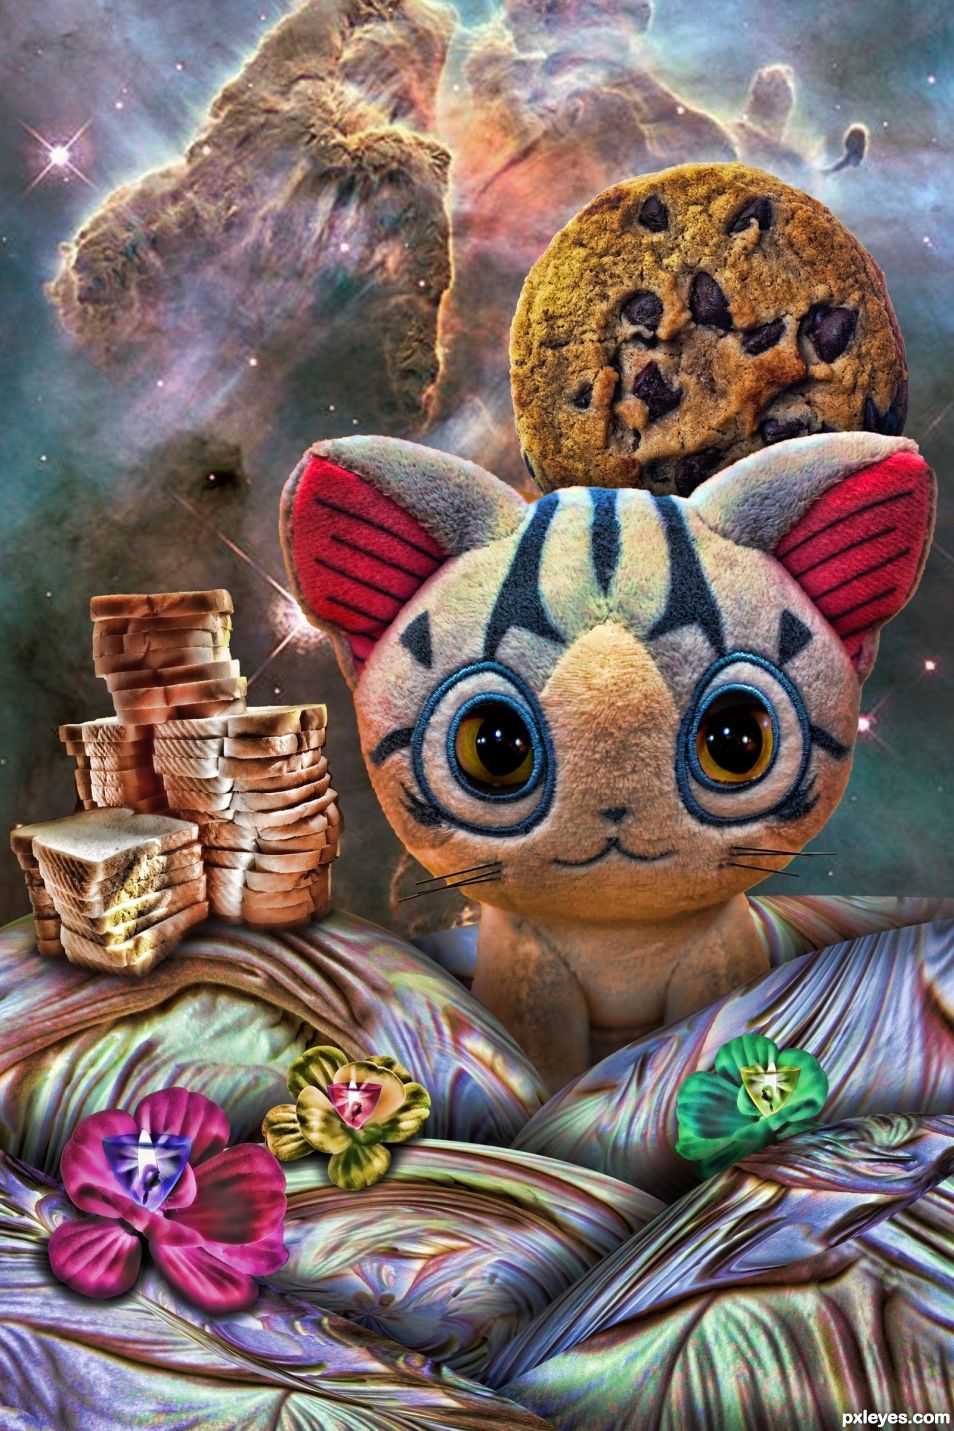 Sliced Bread, Chocolate Chip Cookie and Stuffed Kitten Scape